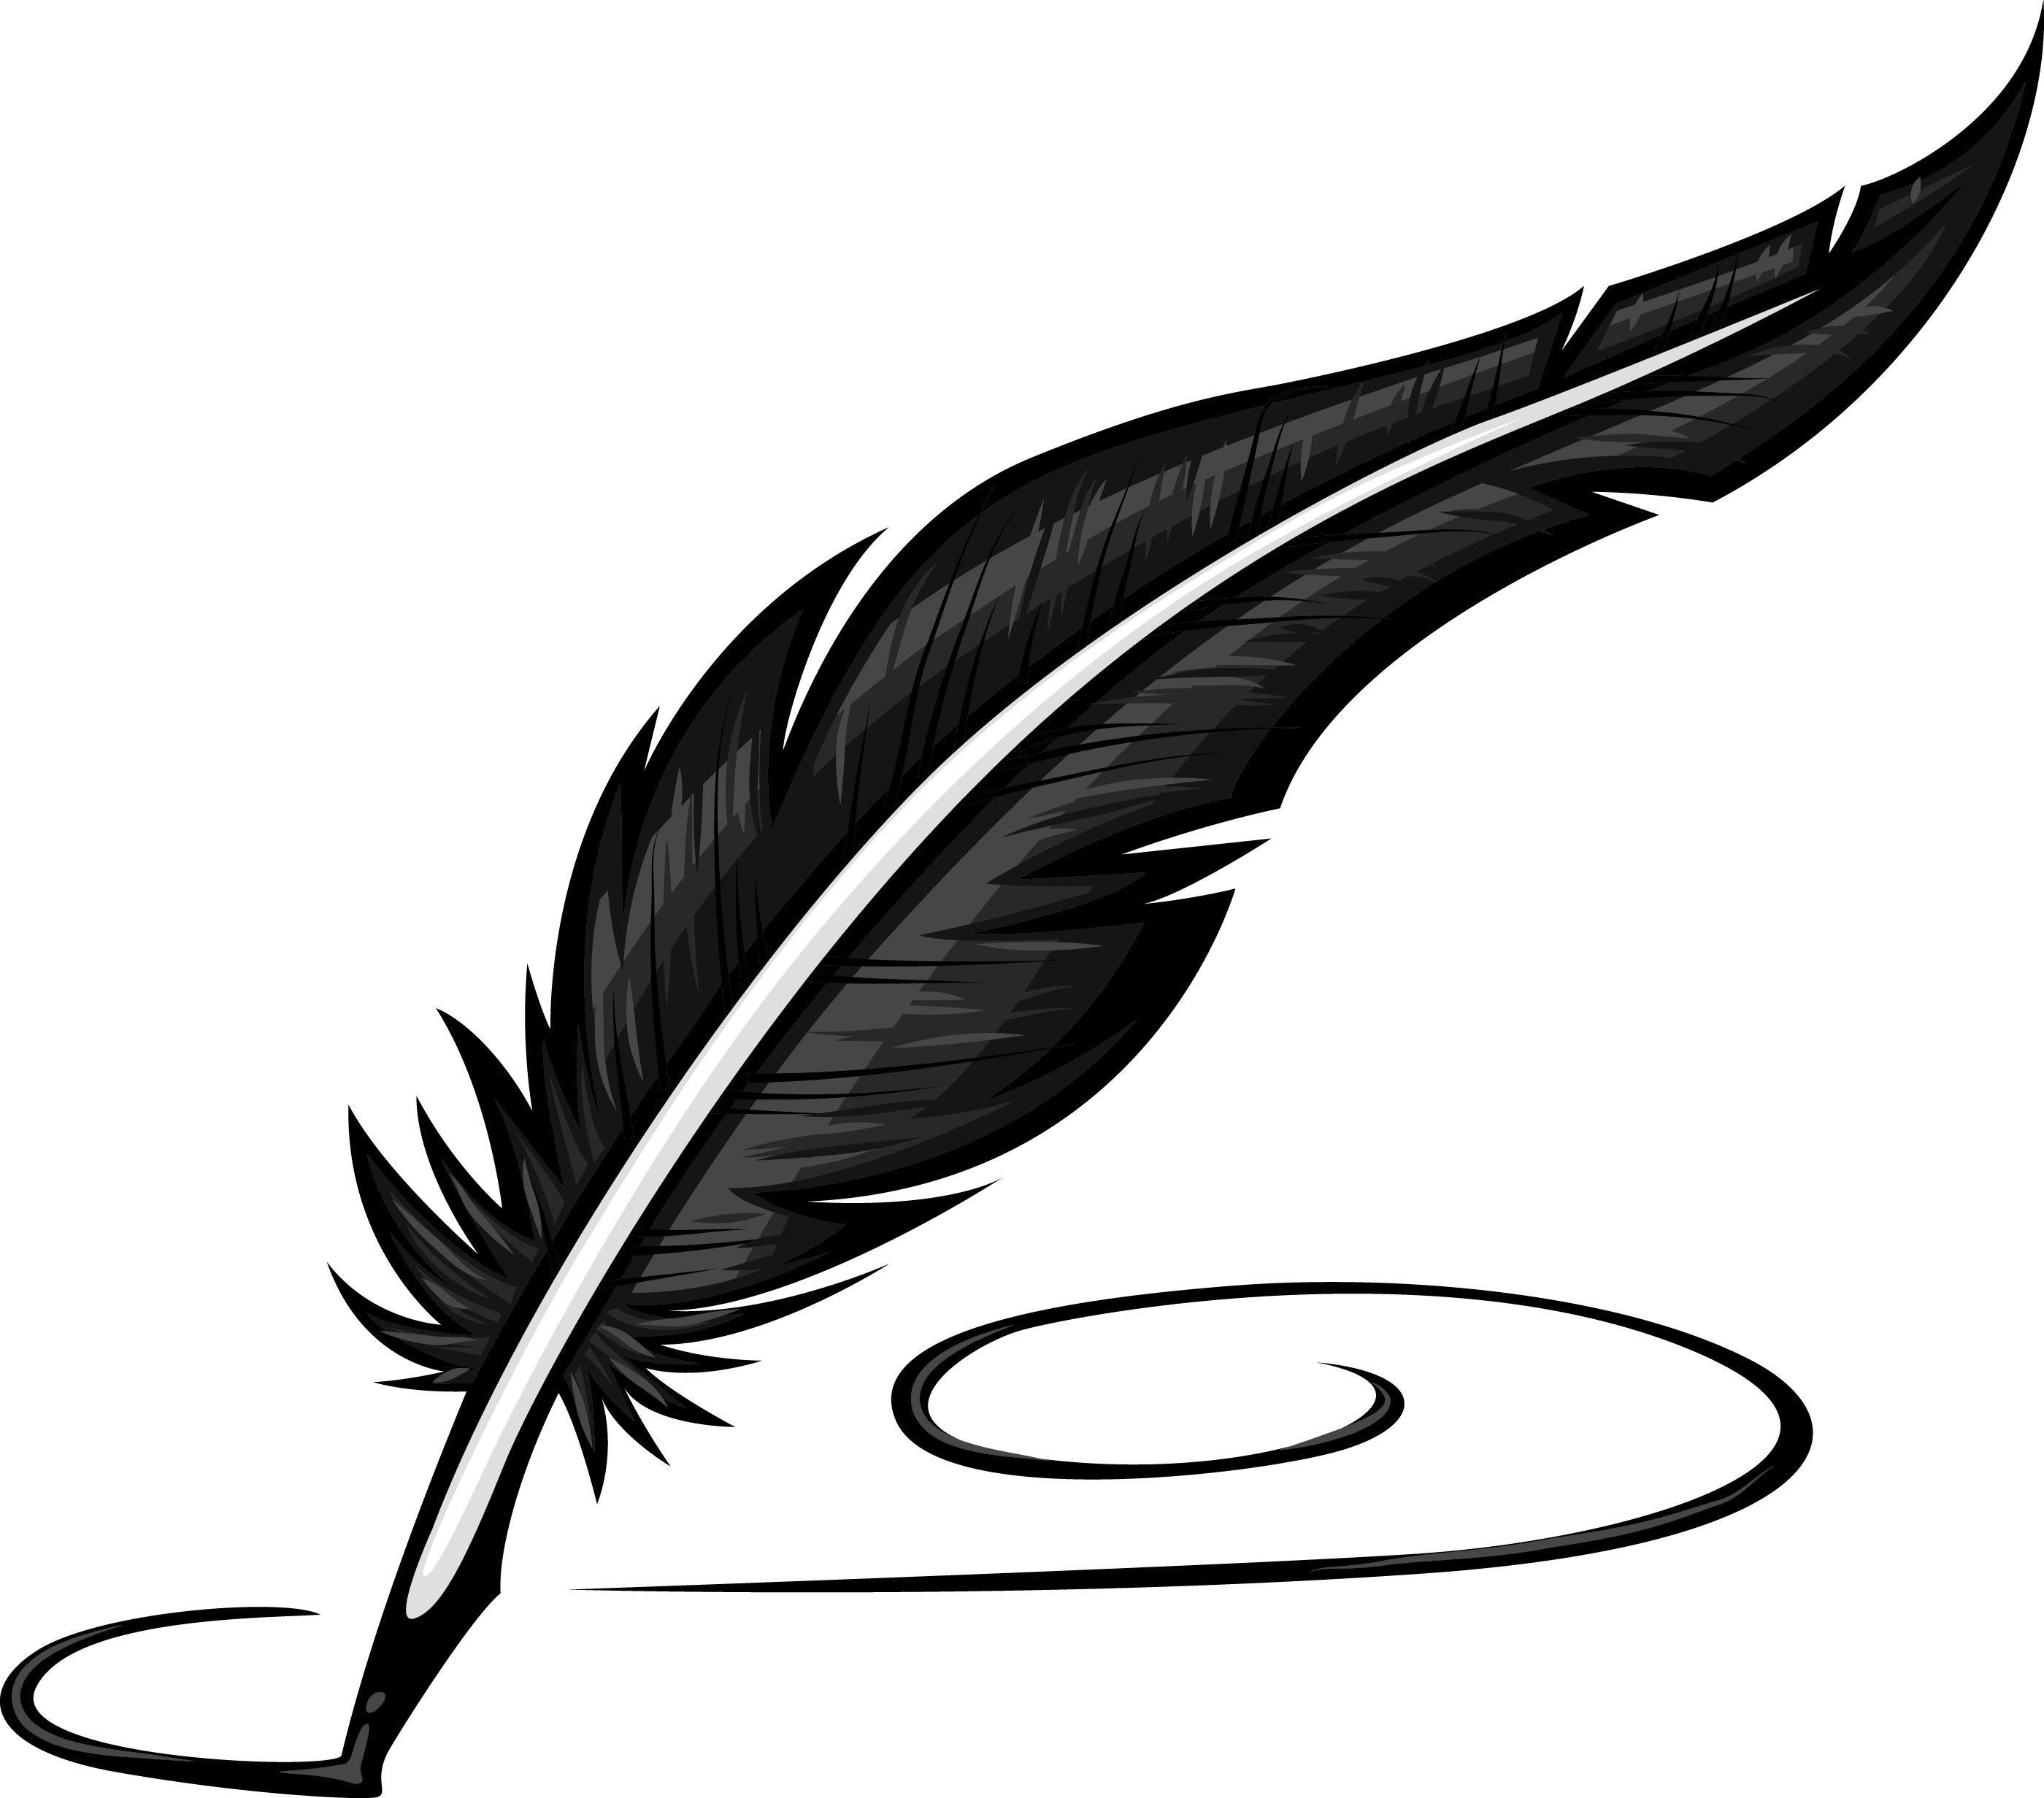 Black and White Quill Logo - Free Quill Pen Image, Download Free Clip Art, Free Clip Art